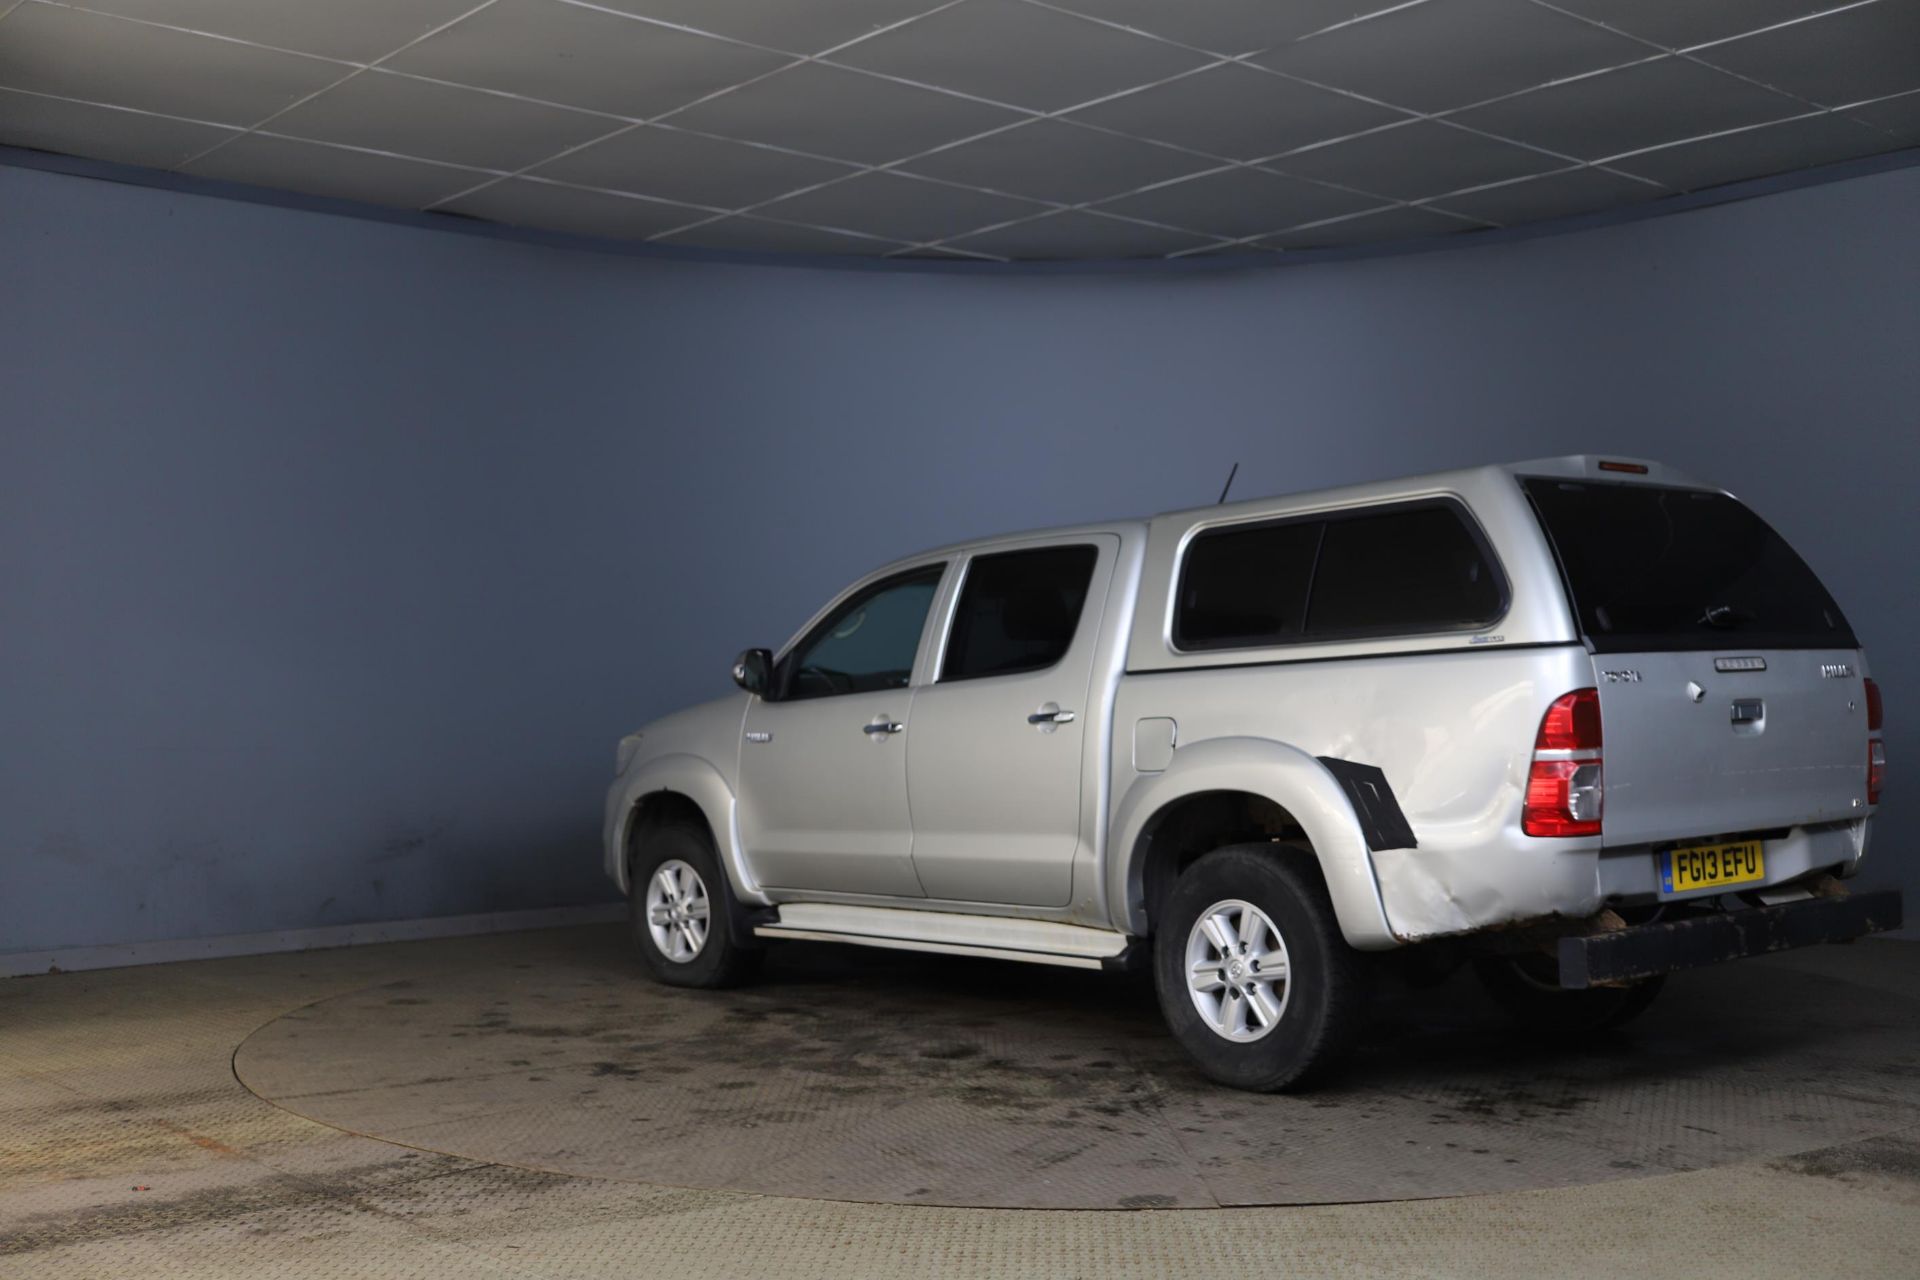 TOYOTA HILUX 2.4D-4D "Active" Double Cab Pick Up - 2013 13 Reg - 1 Owner - Only 28K Miles - Image 5 of 12